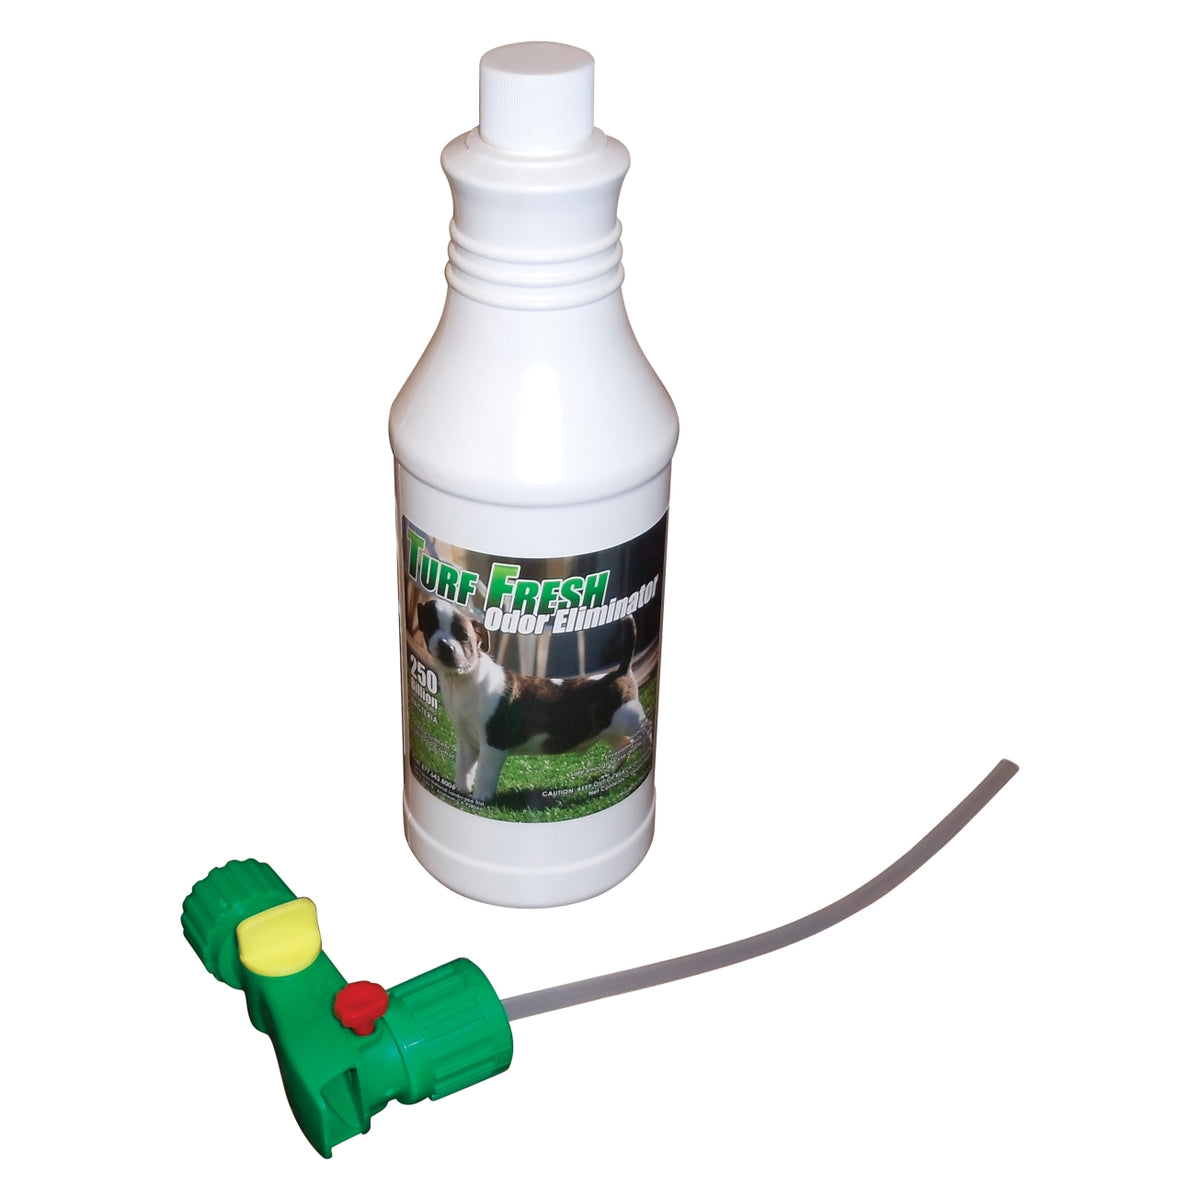 Buy turf fresh odor eliminator - Online store for pet care, odor & stain removers in USA, on sale, low price, discount deals, coupon code